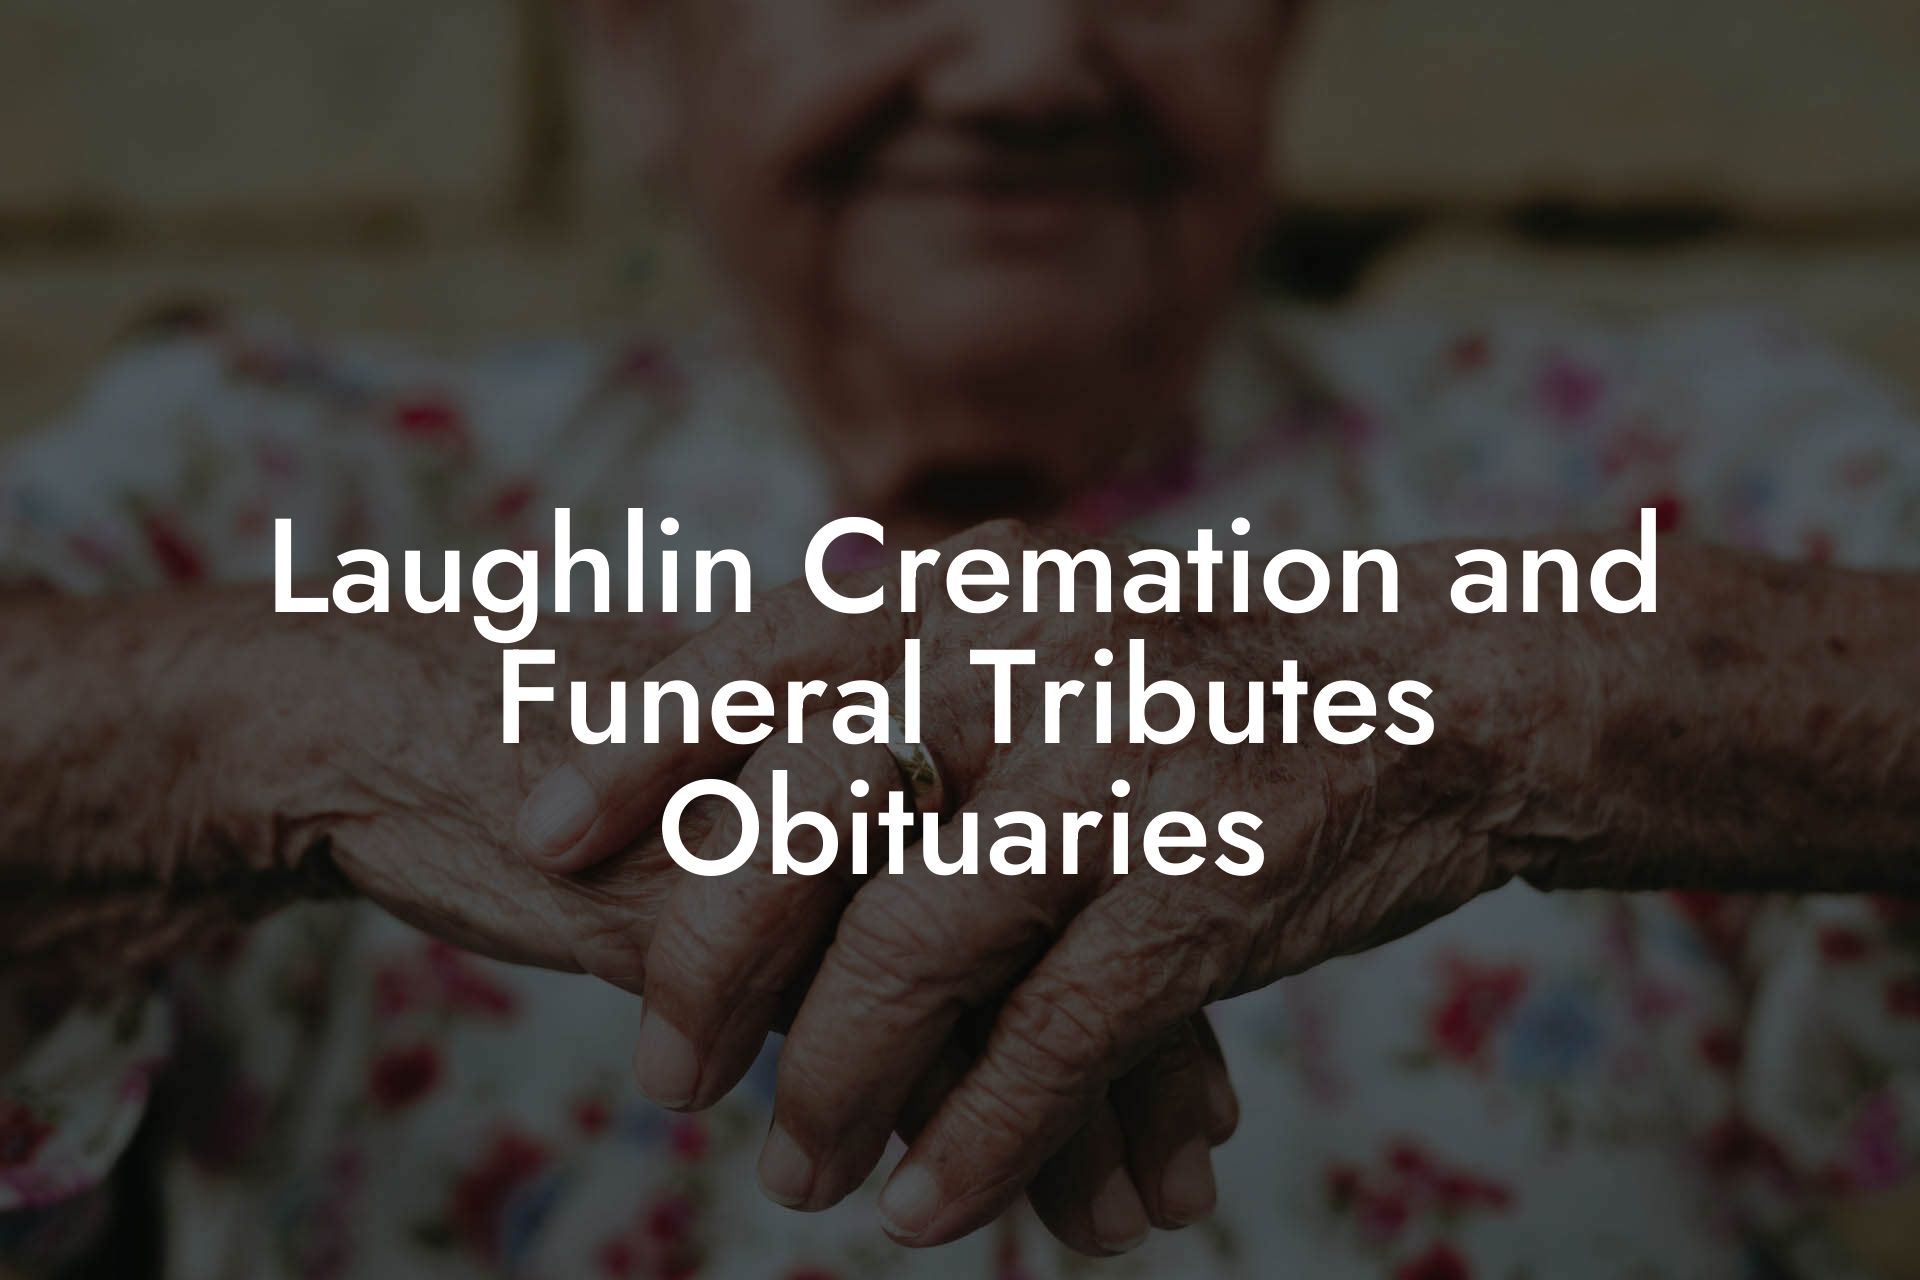 Laughlin Cremation and Funeral Tributes Obituaries